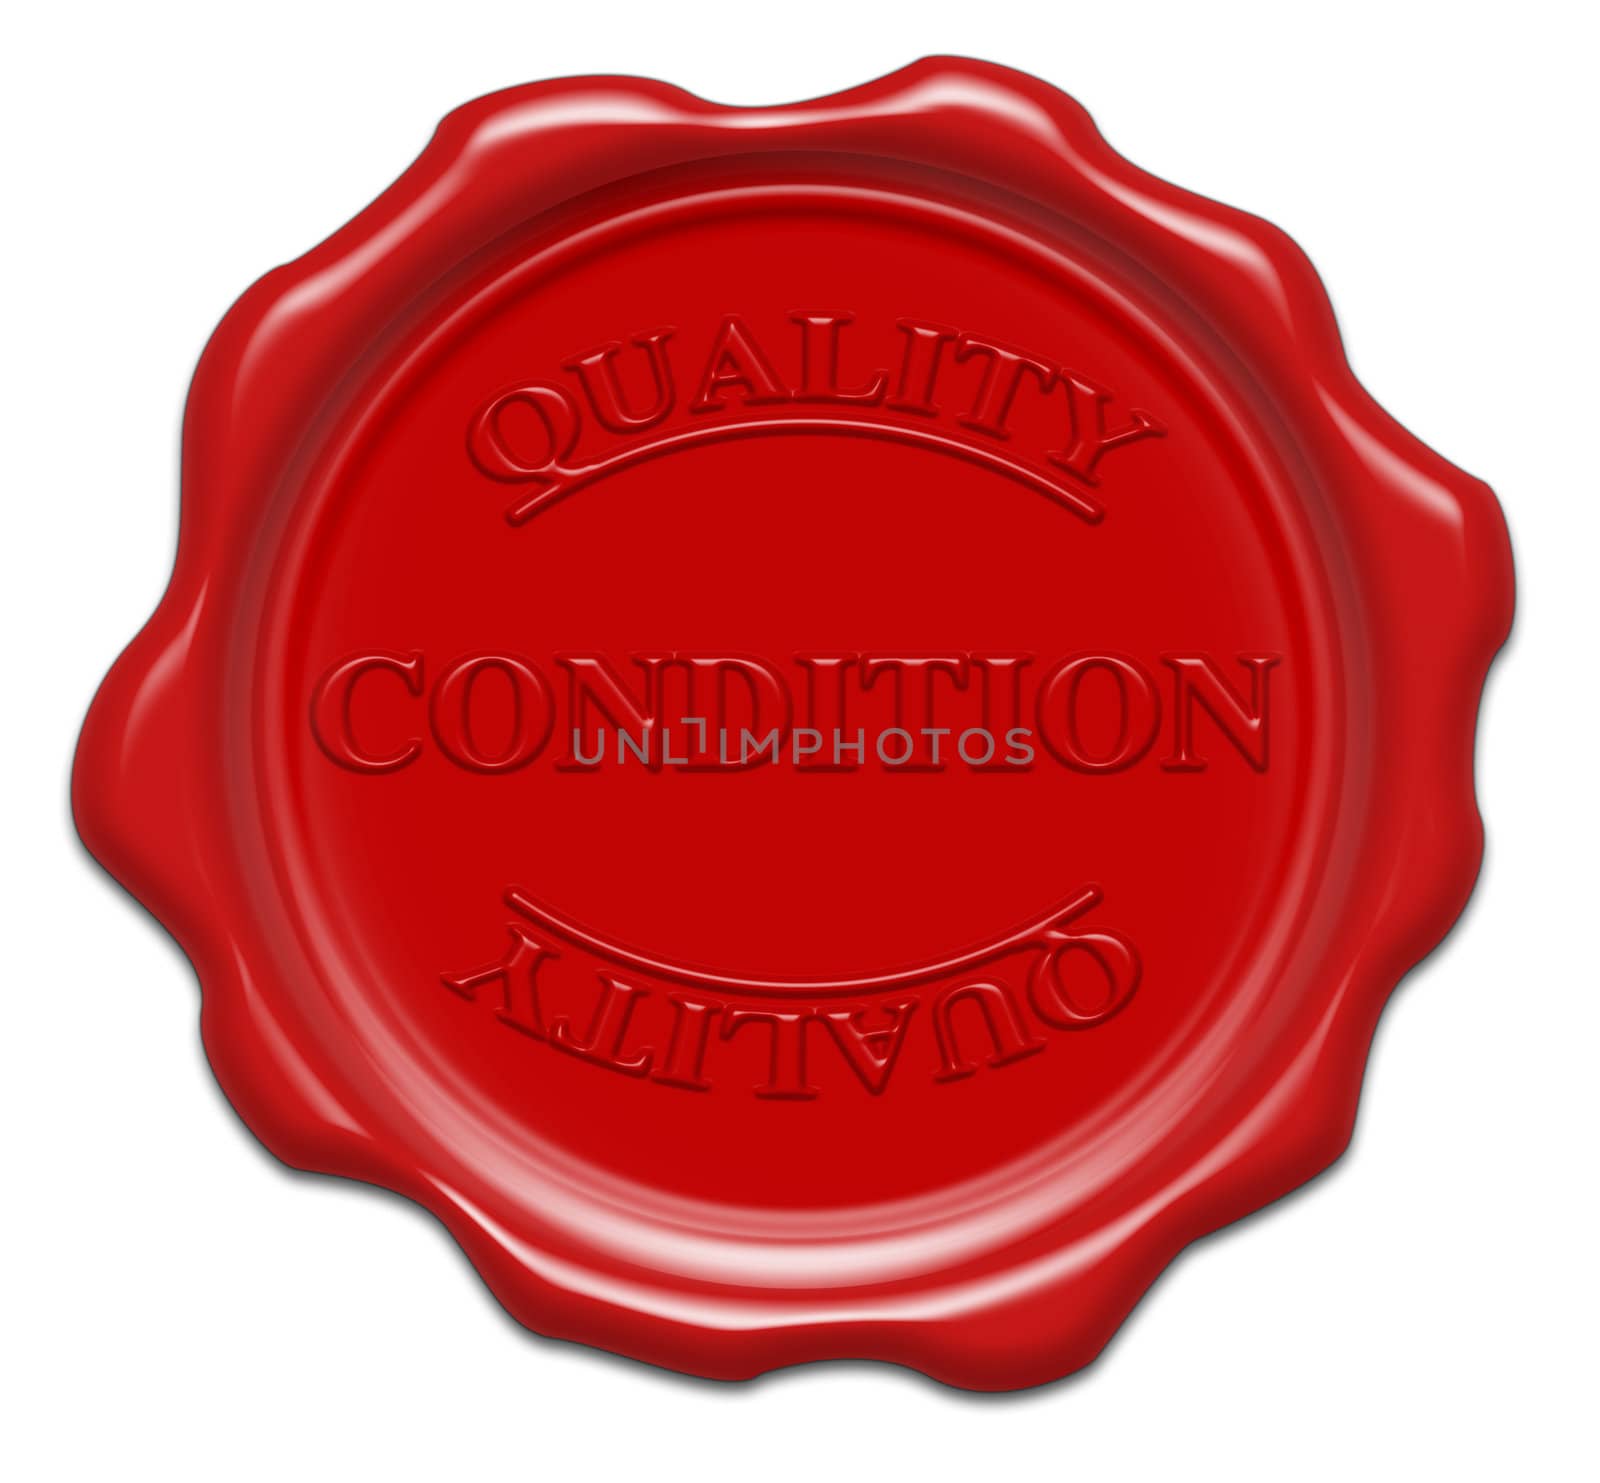 quality condition - illustration red wax seal isolated on white  by mozzyb